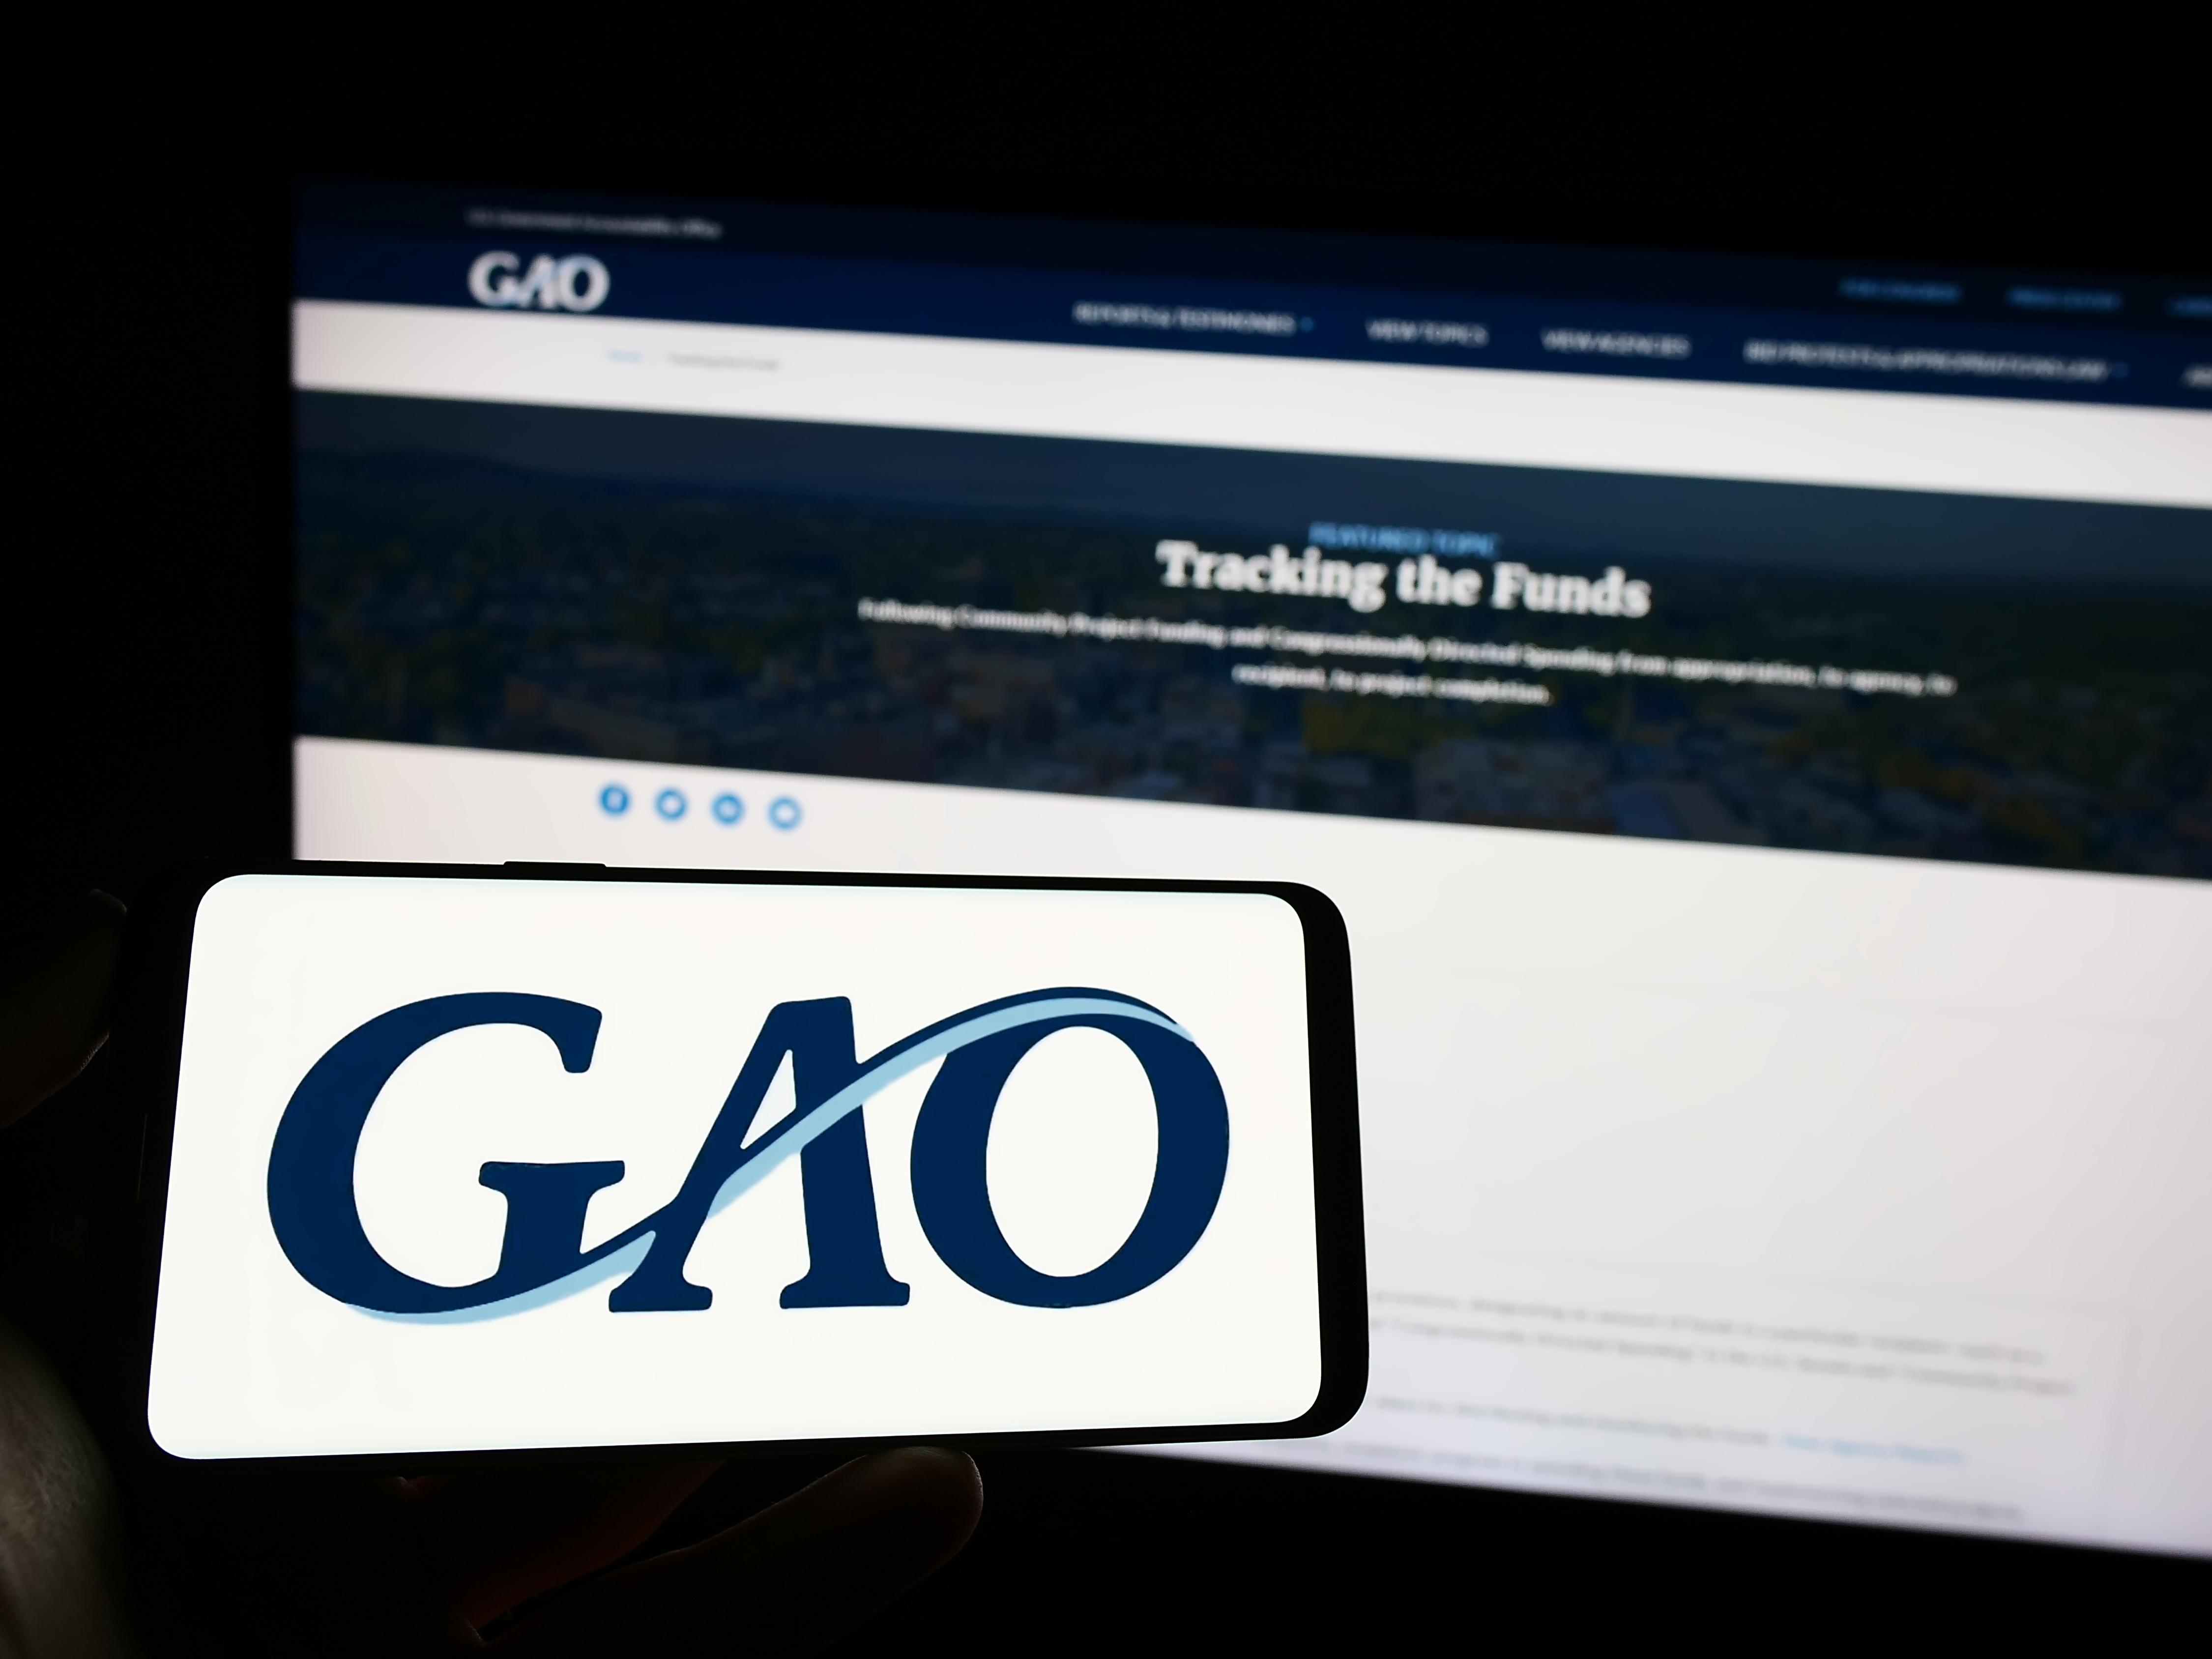 Stuttgart, Germany - 04-23-2023: Person holding mobile phone with logo of US Government Accountability Office (GAO) on screen in front of web page. Focus on phone display. Unmodified photo.